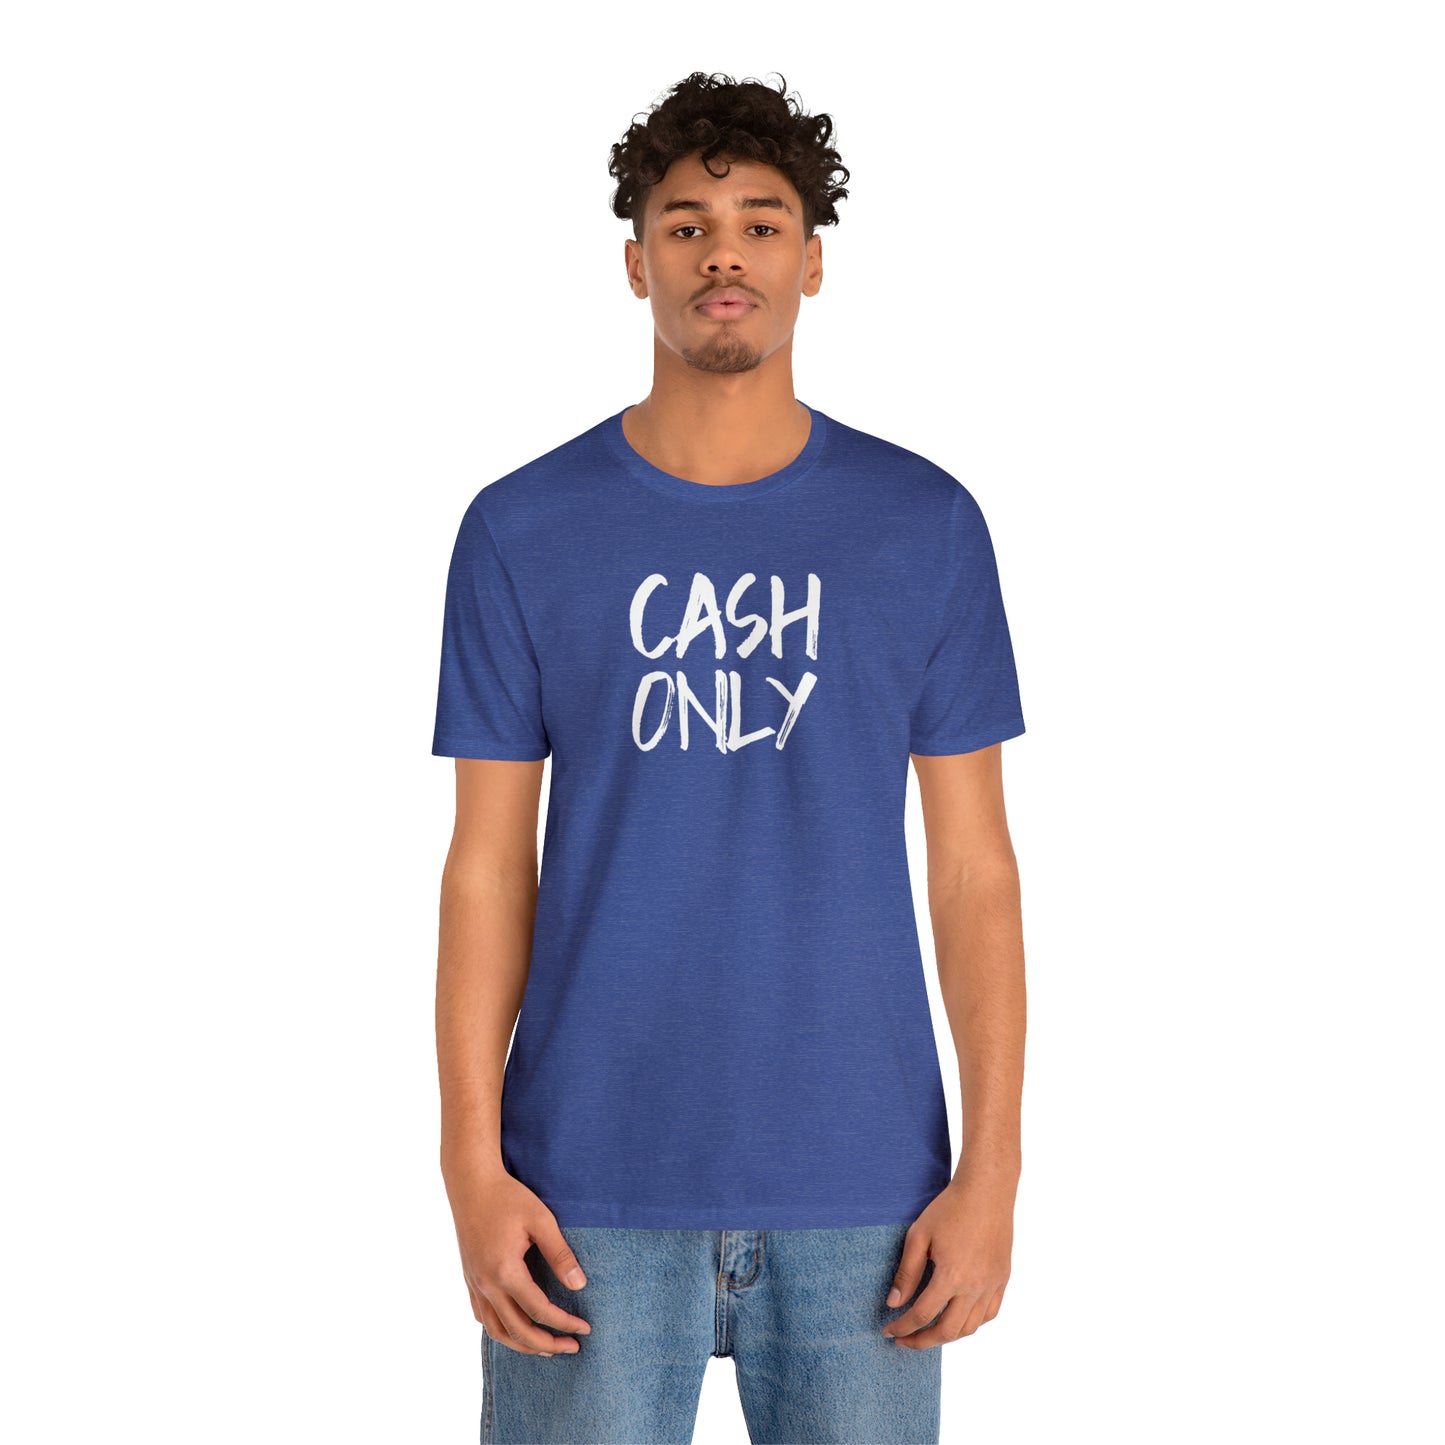 CASH ONLY - Wicked Naughty Apparel